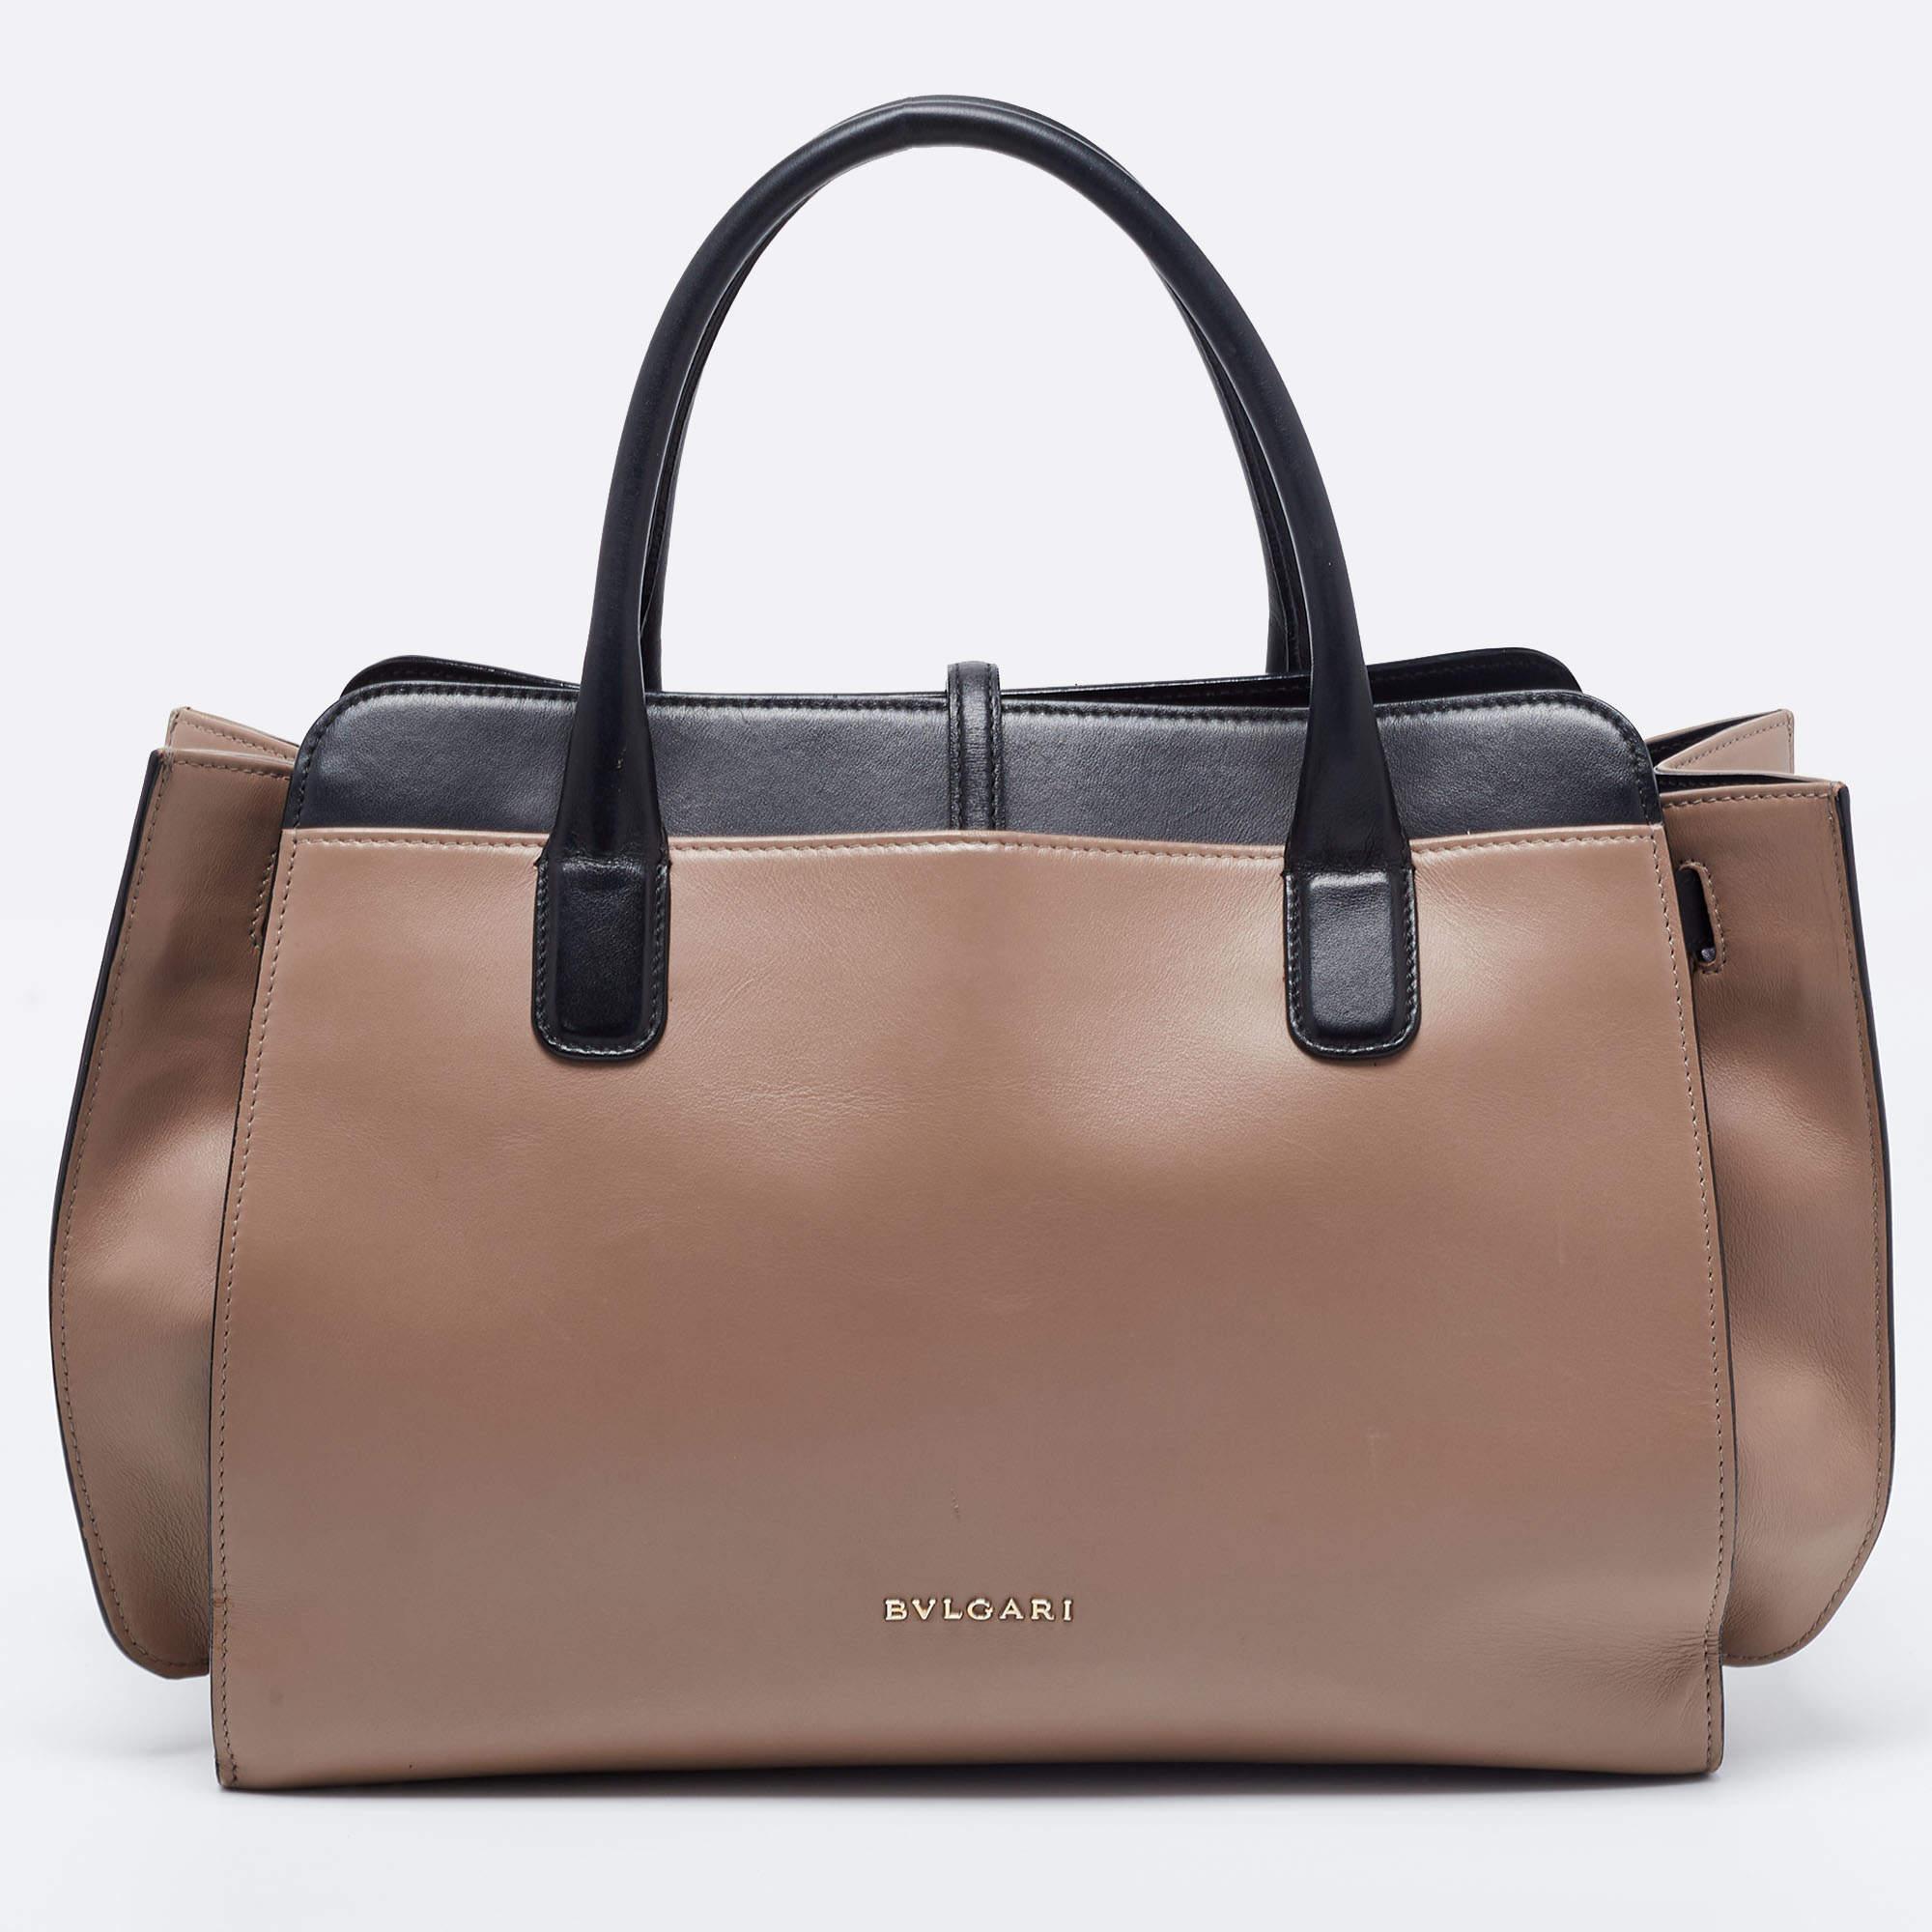 Handbags are more than just instruments to carry one's essentials. They tell a woman's sense of style, and the better the bag, the more confidence she gets when she holds it. Bvlgari brings you one such fabulous bag meticulously made from leather in